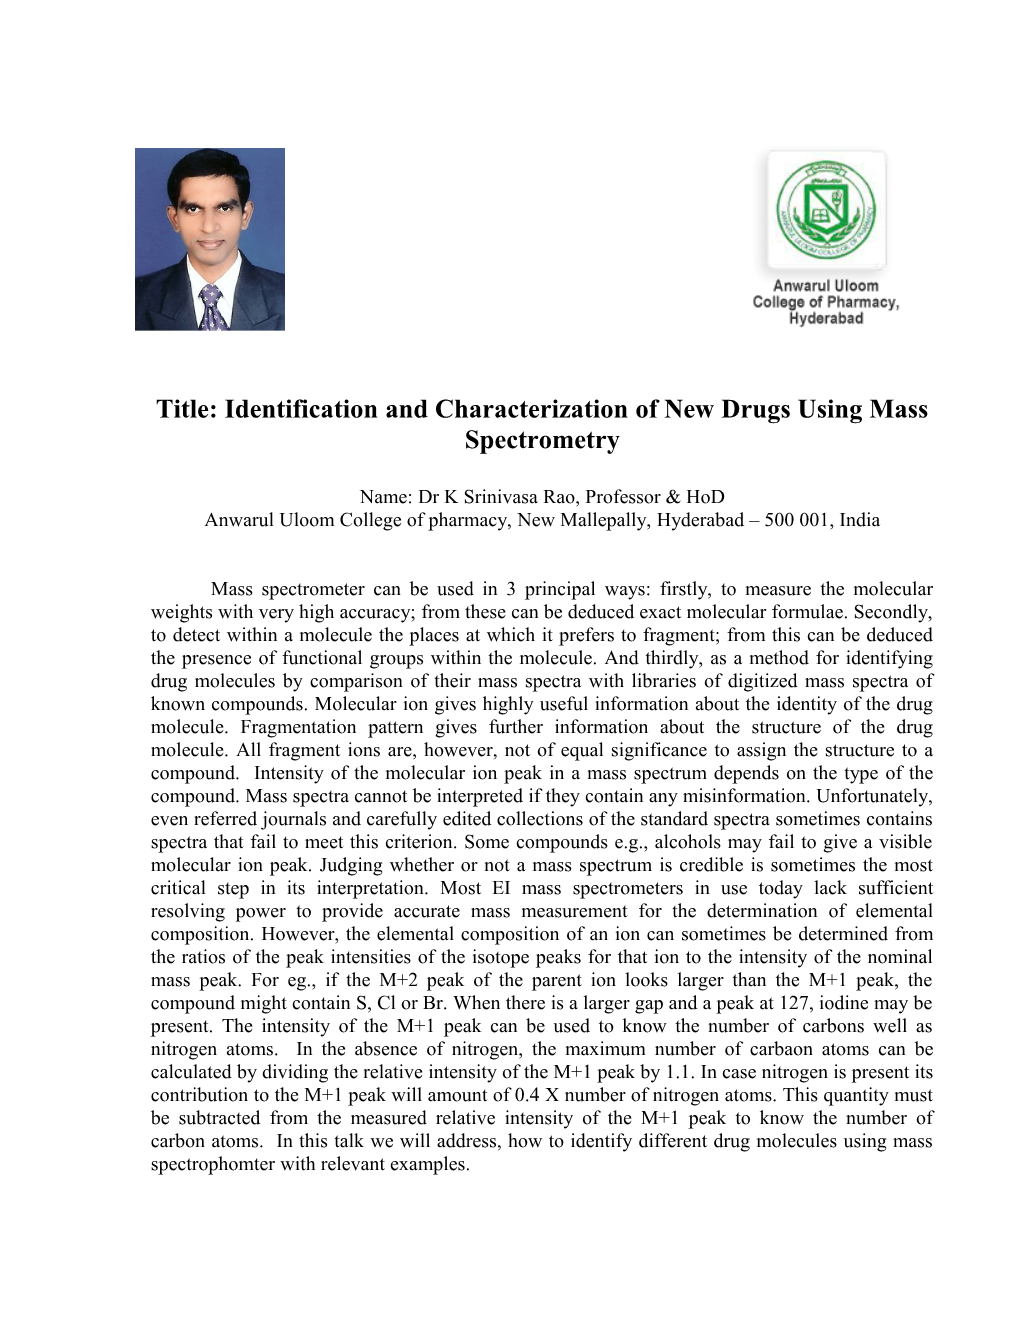 Title: Identification and Characterization of New Drugs Using Mass Spectrometry